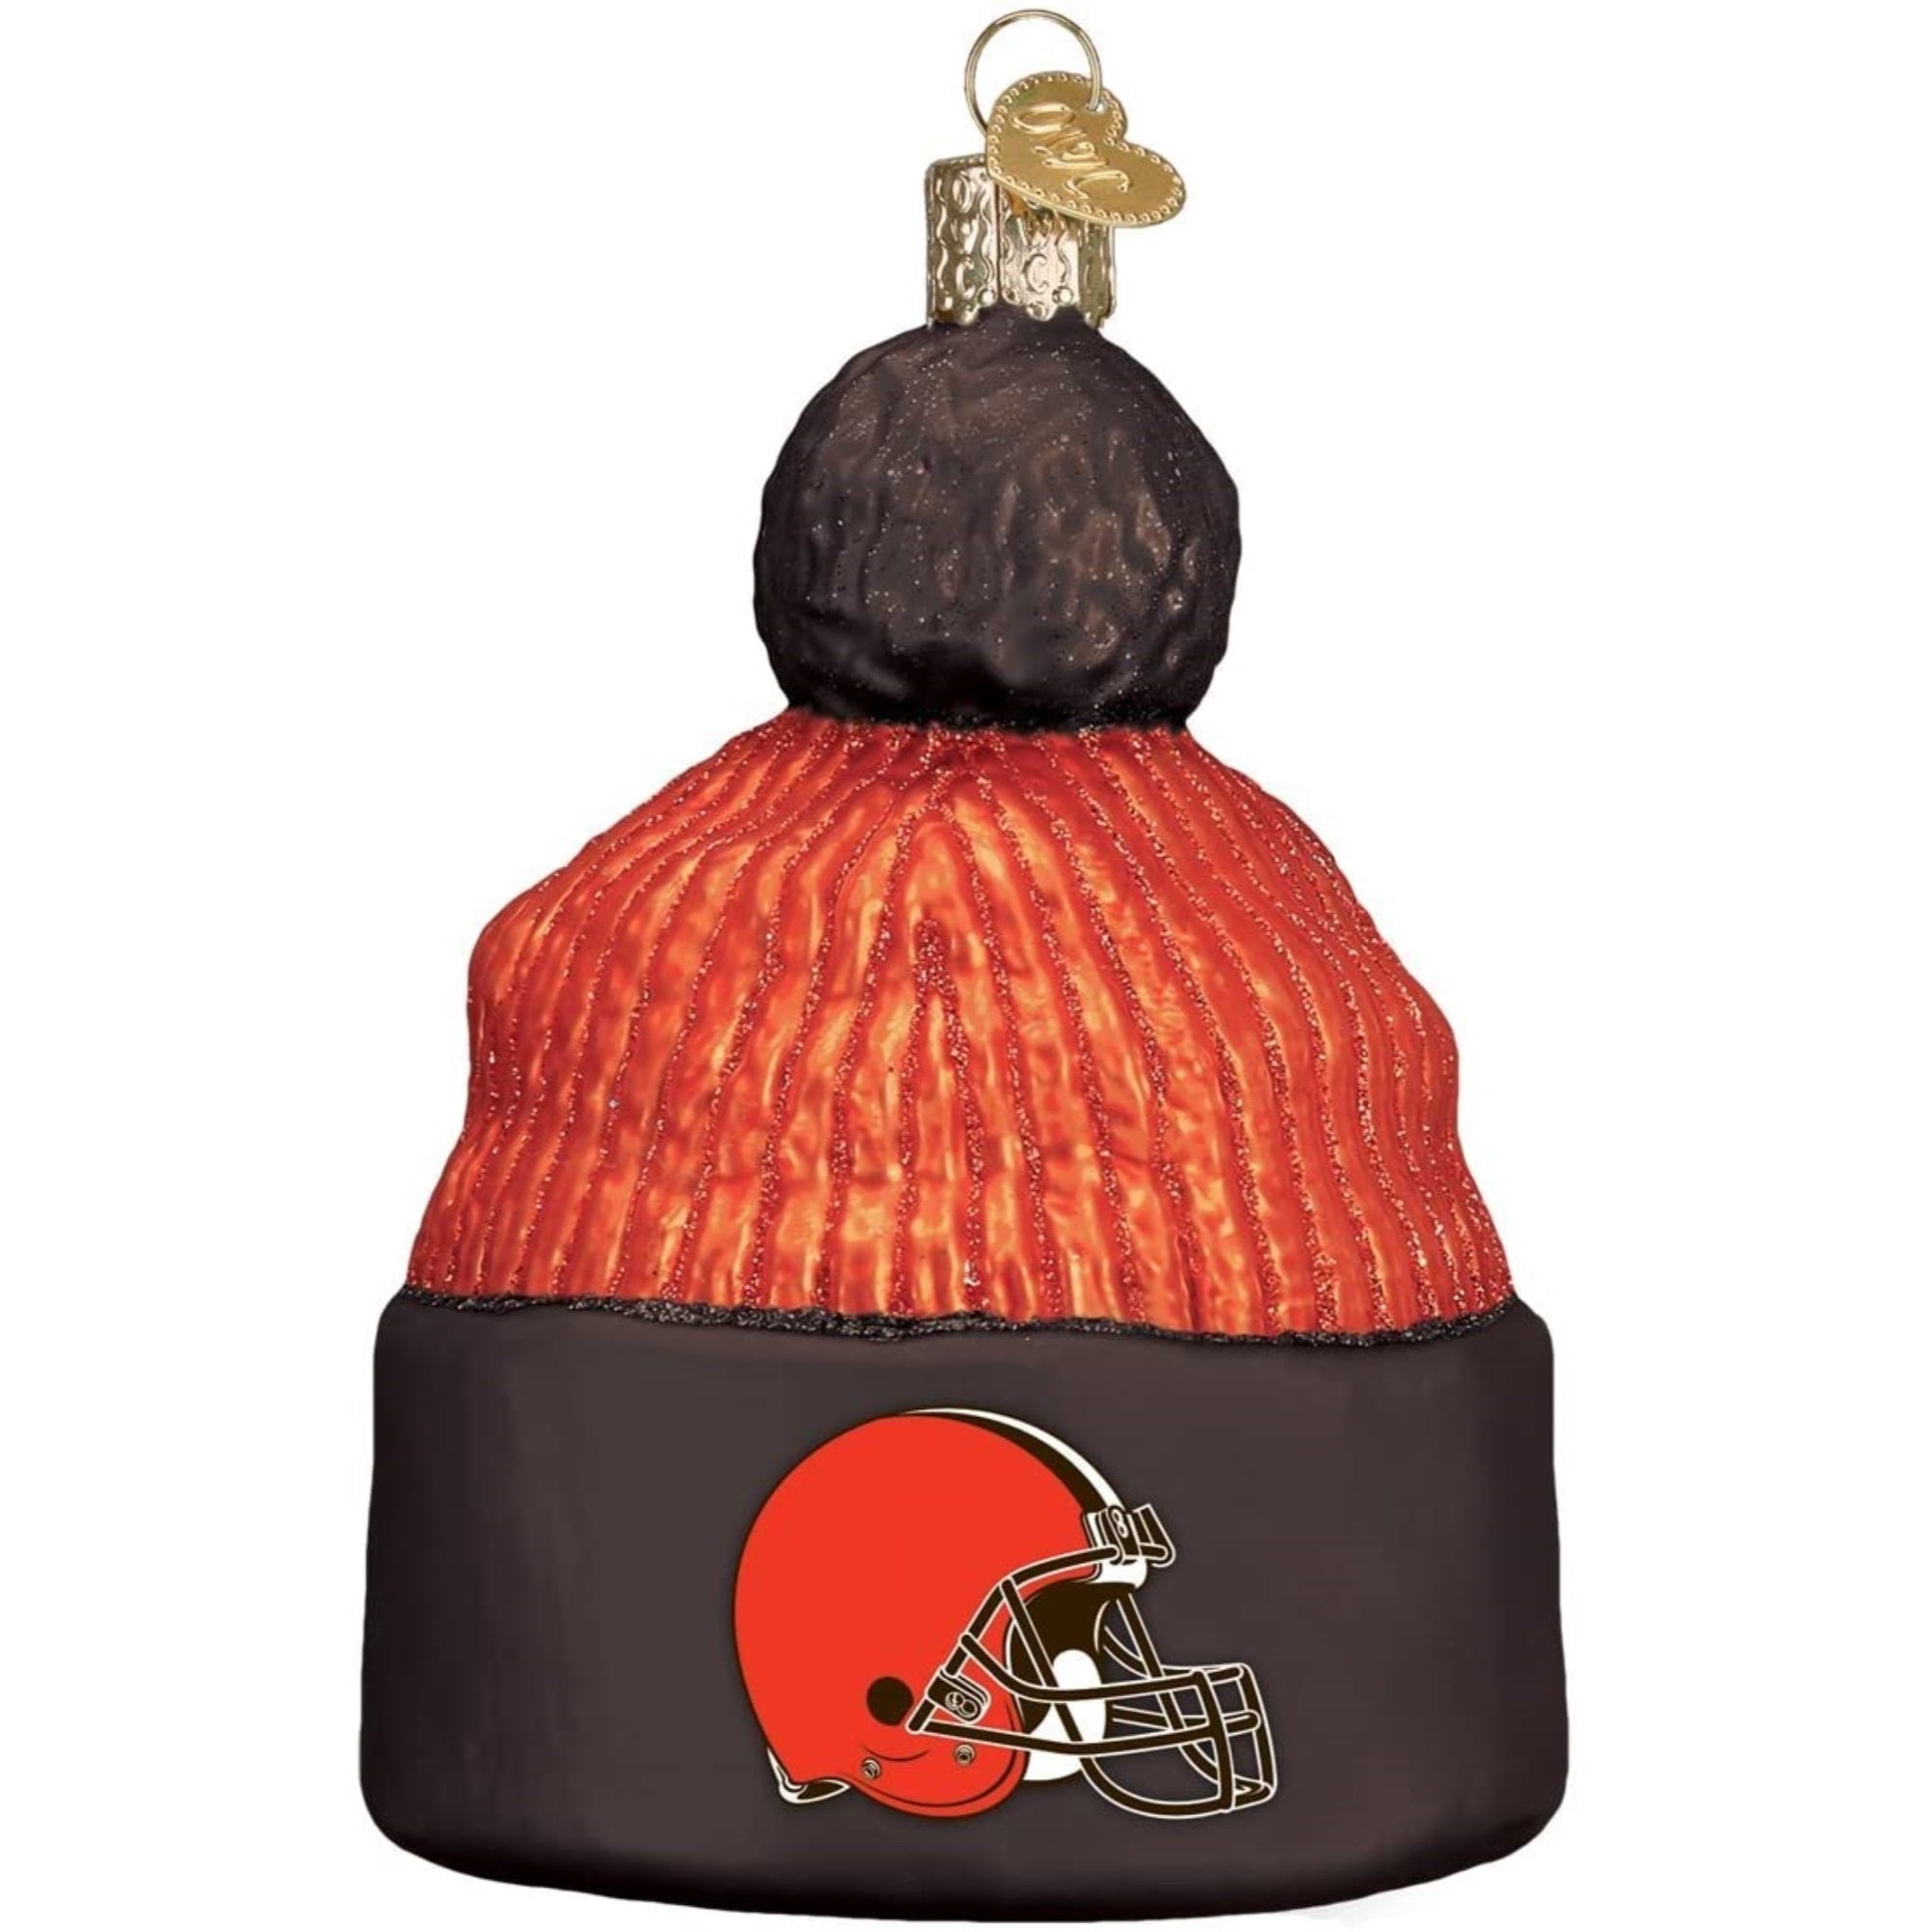 Old World Christmas Cleveland Browns Beanie Ornament For Christmas Tree